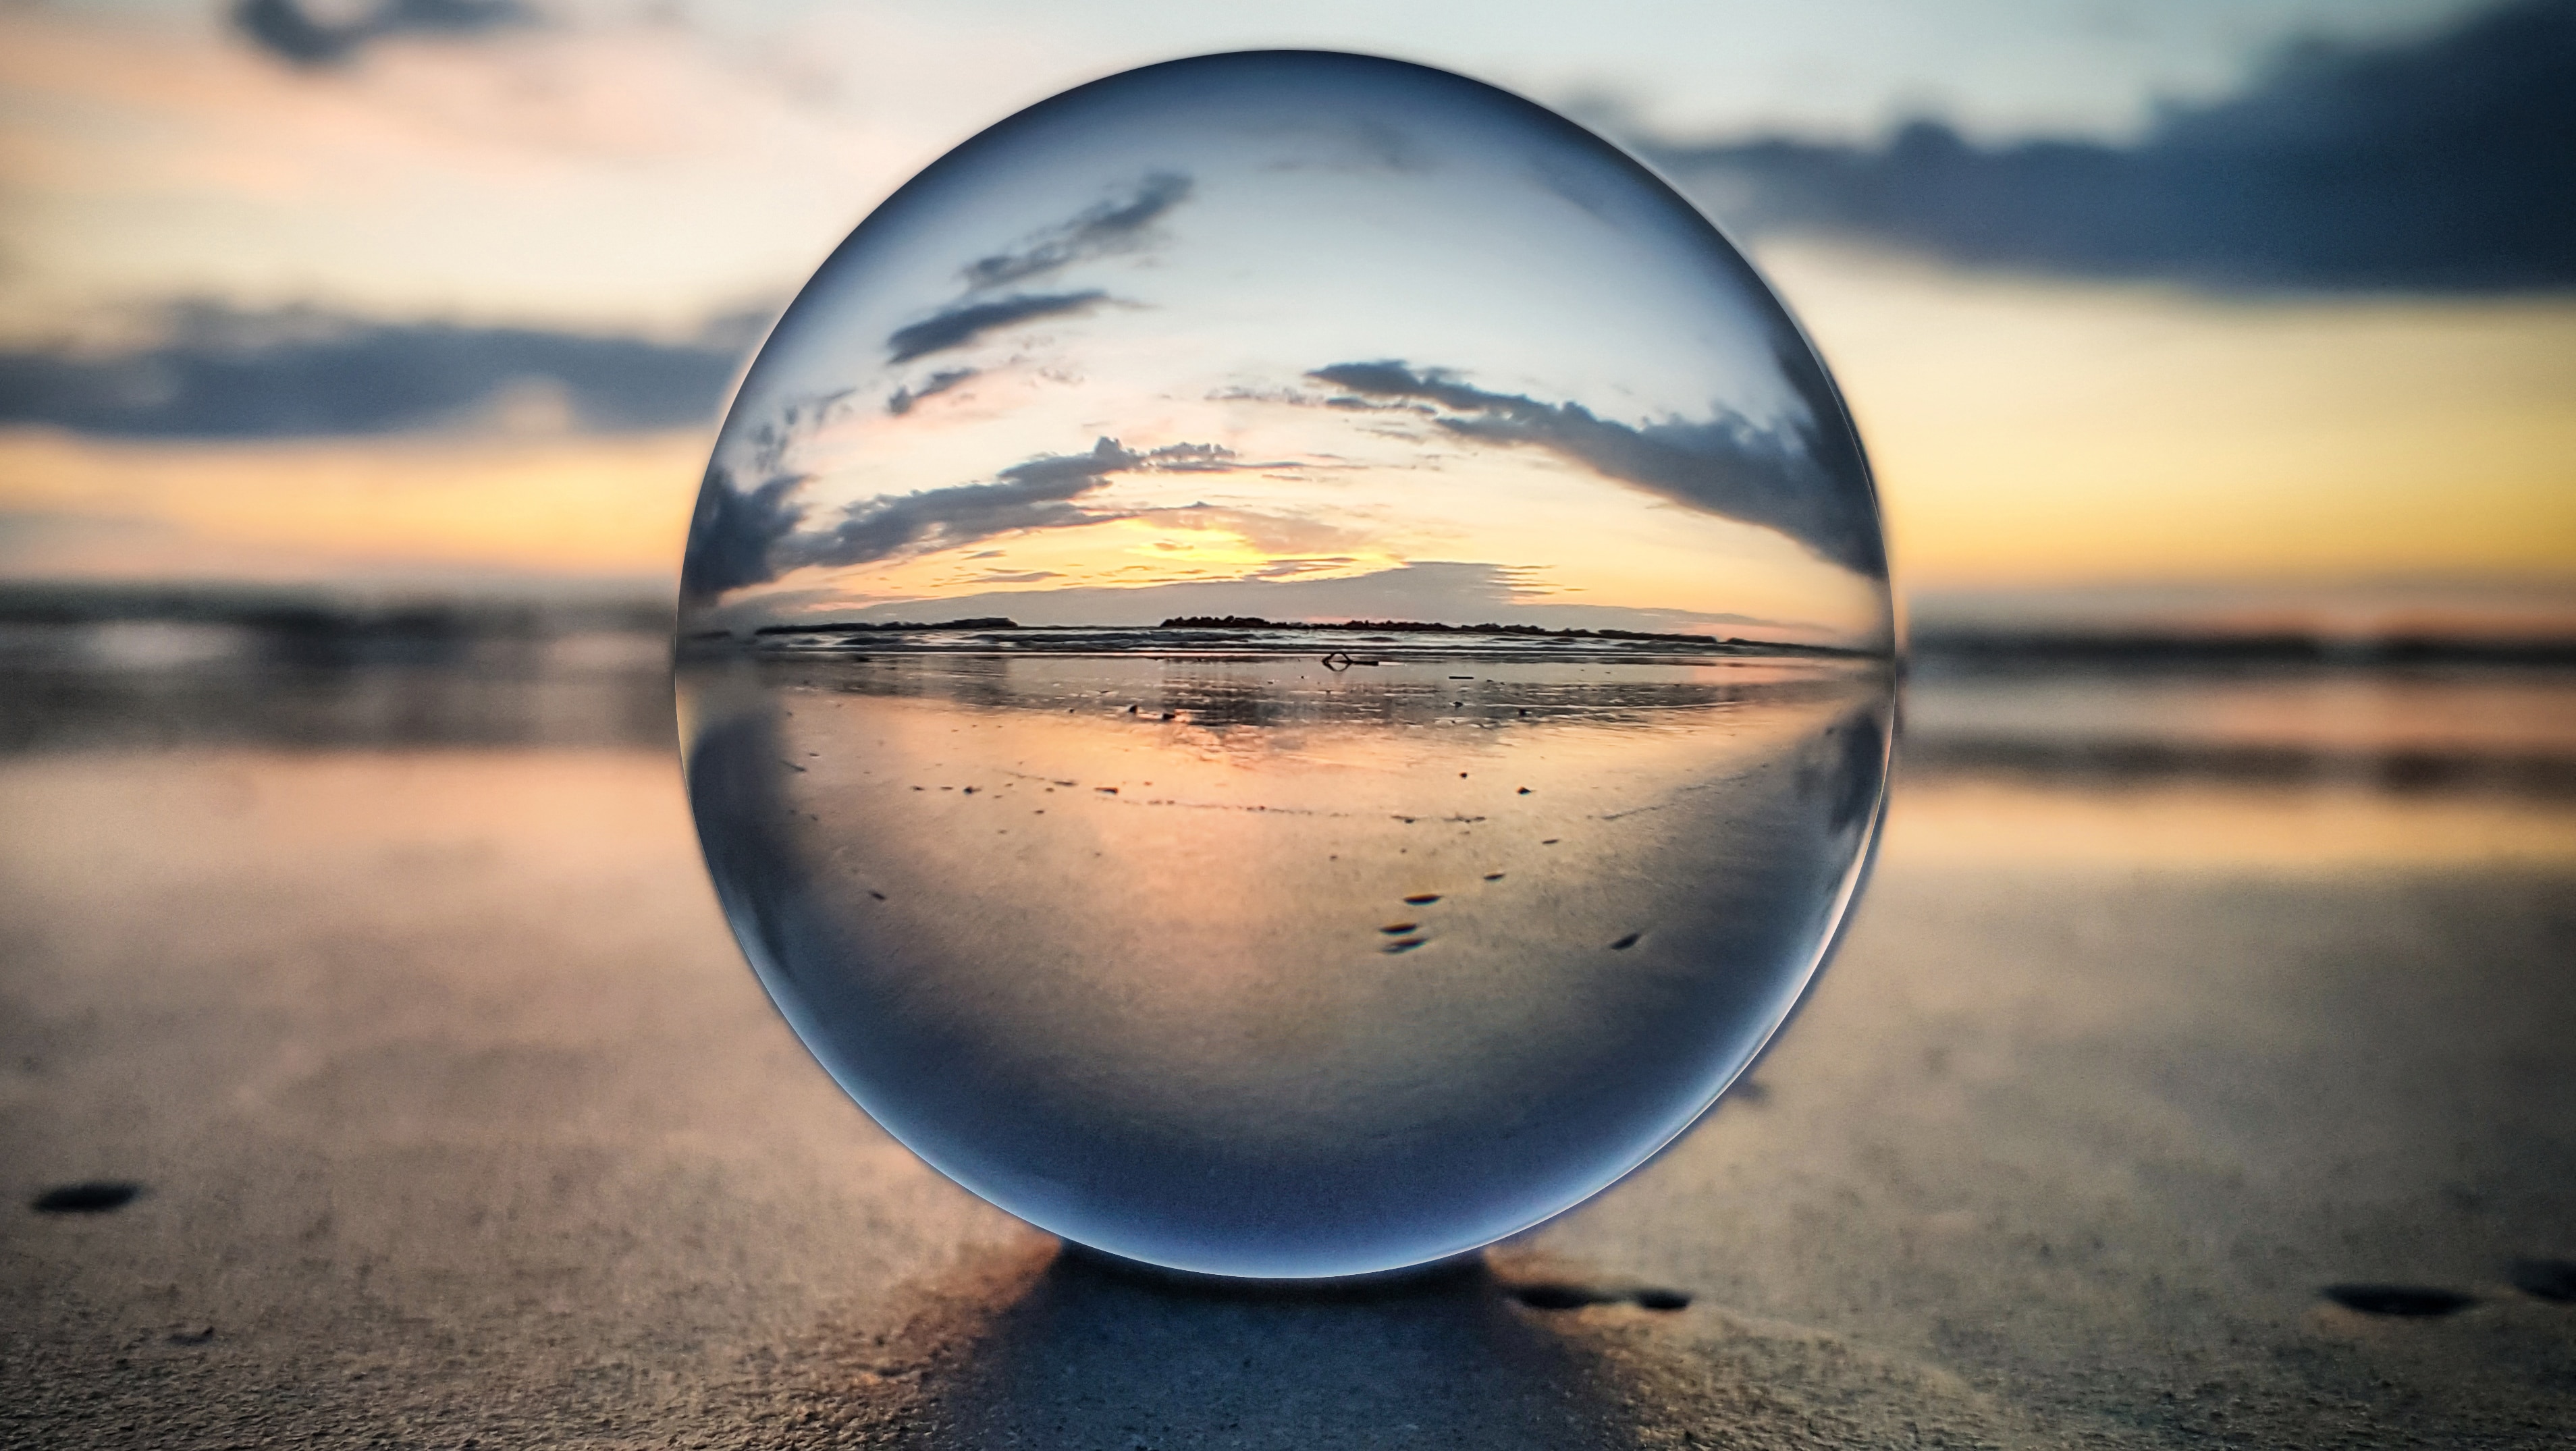 Glass sphere on a beach at sunset